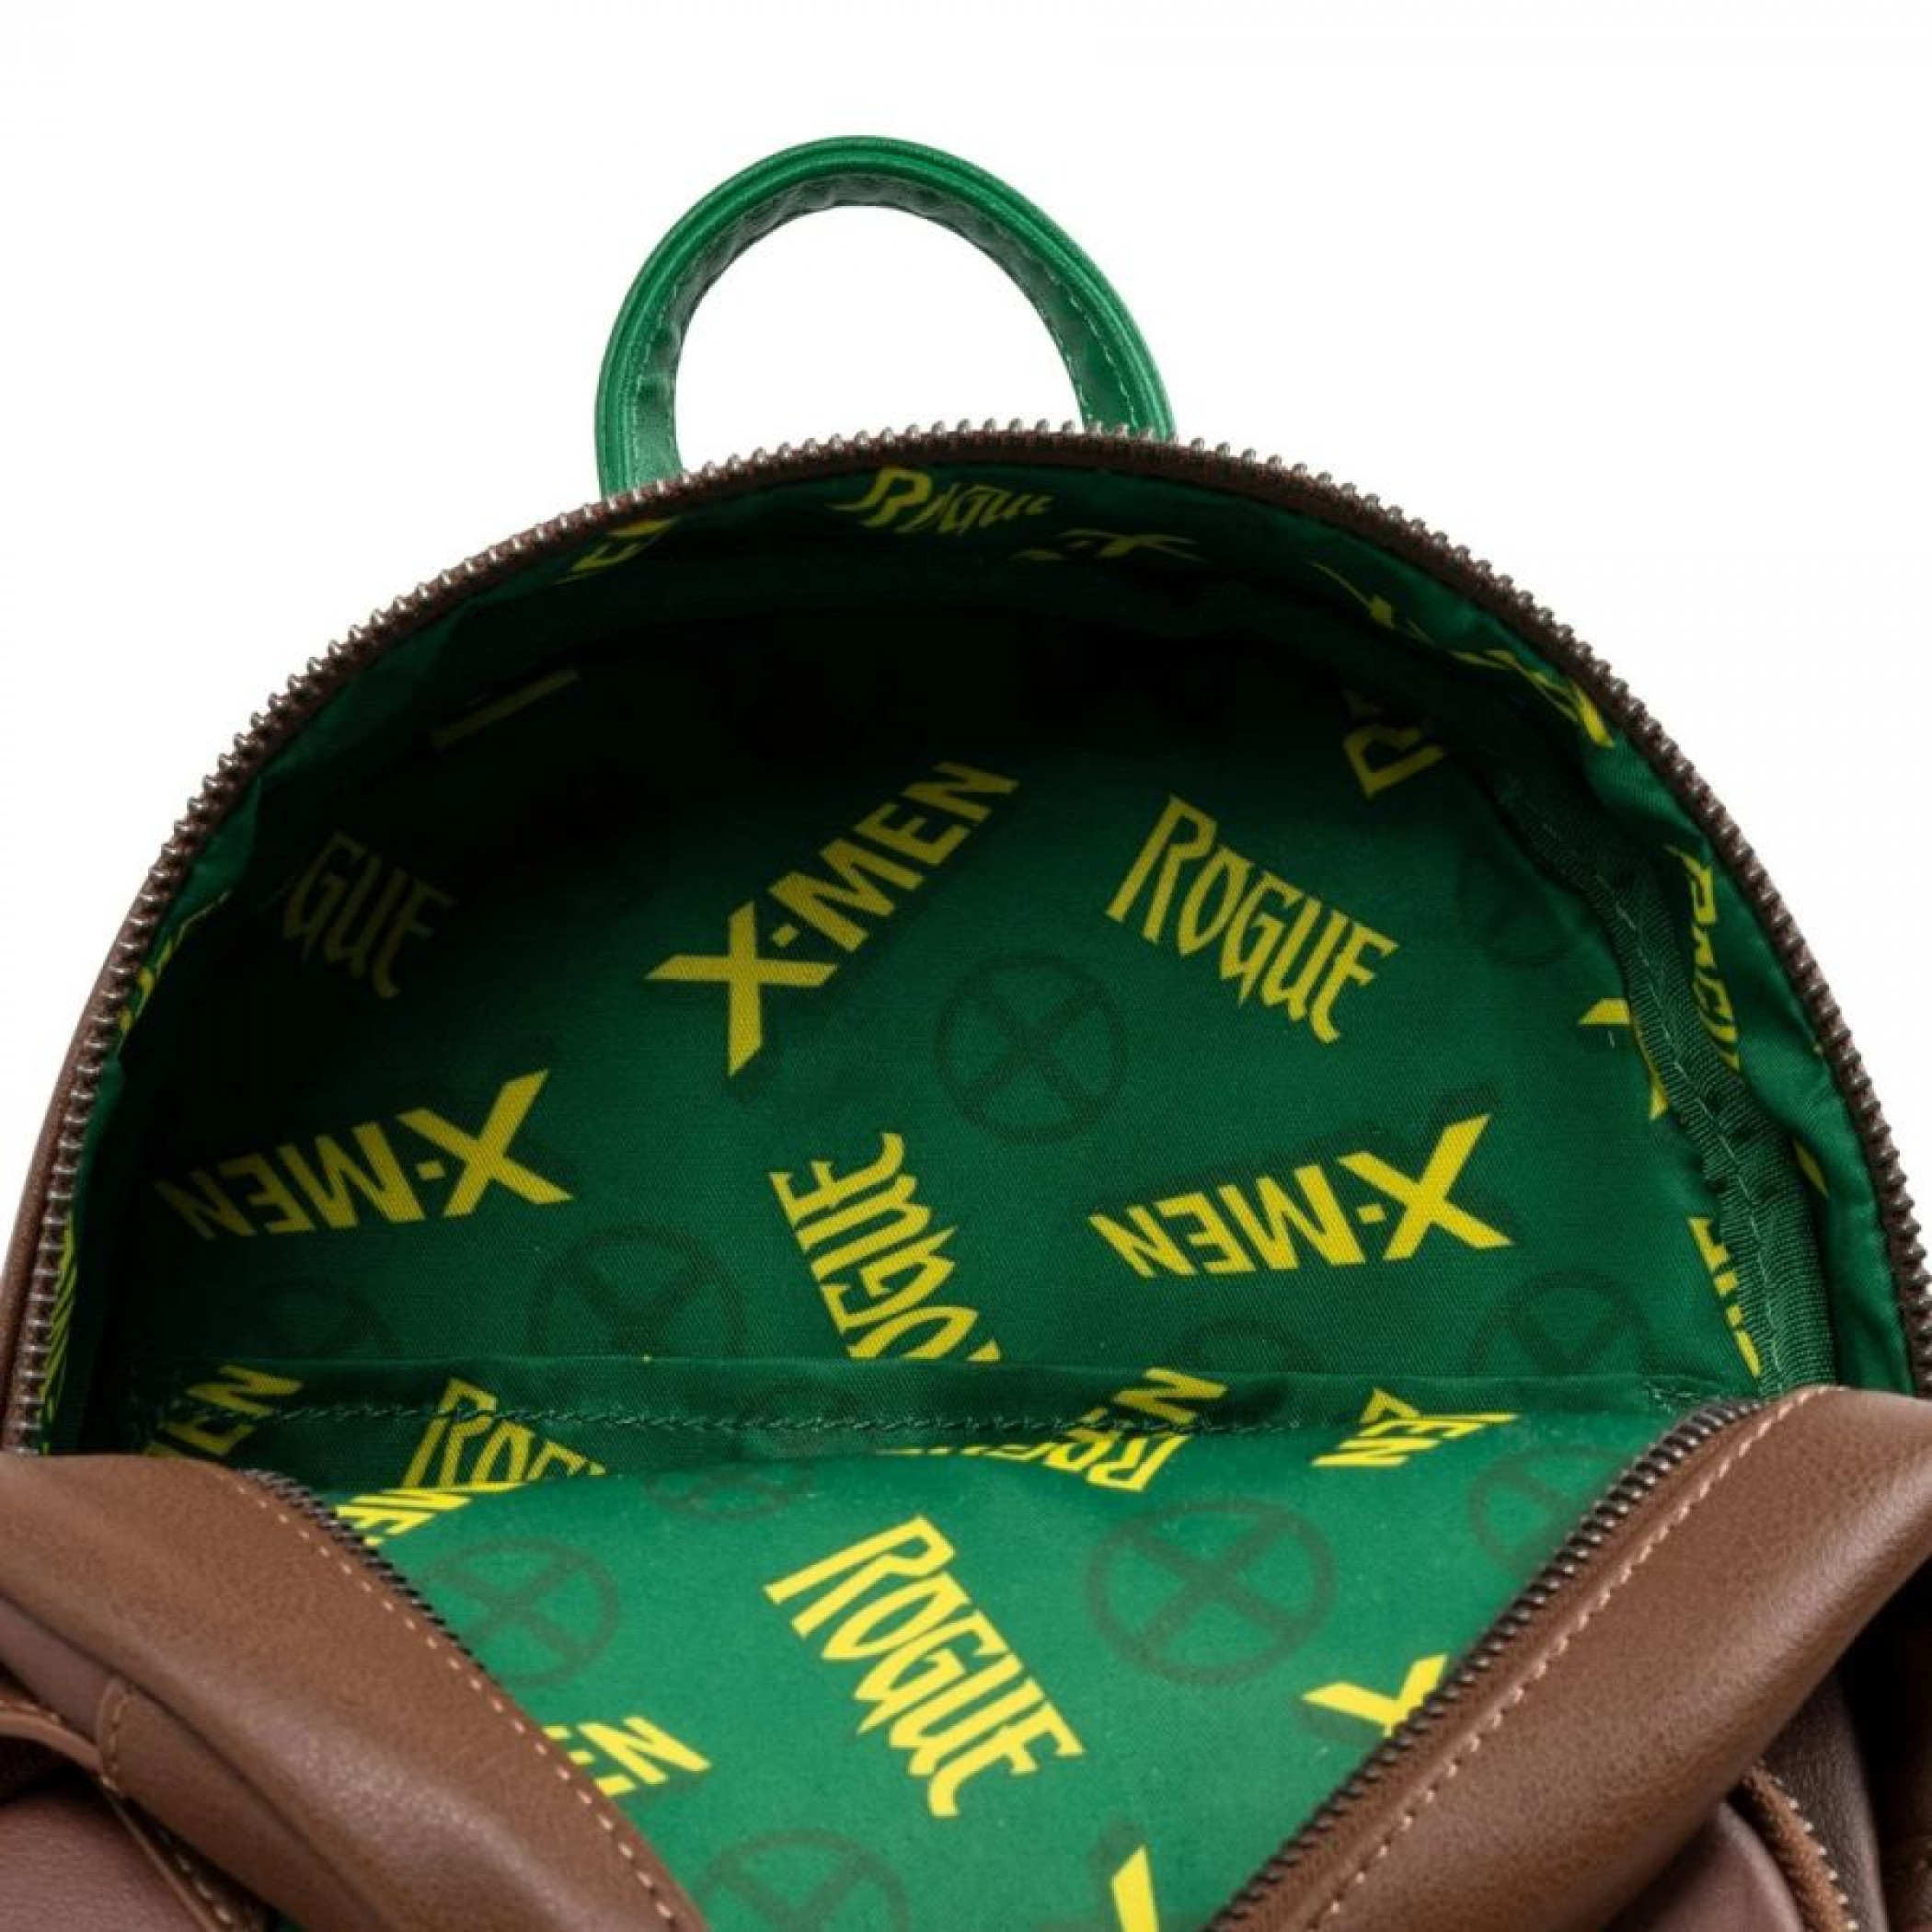 X-Men Rogue Cosplay Mini-Backpack By Loungefly